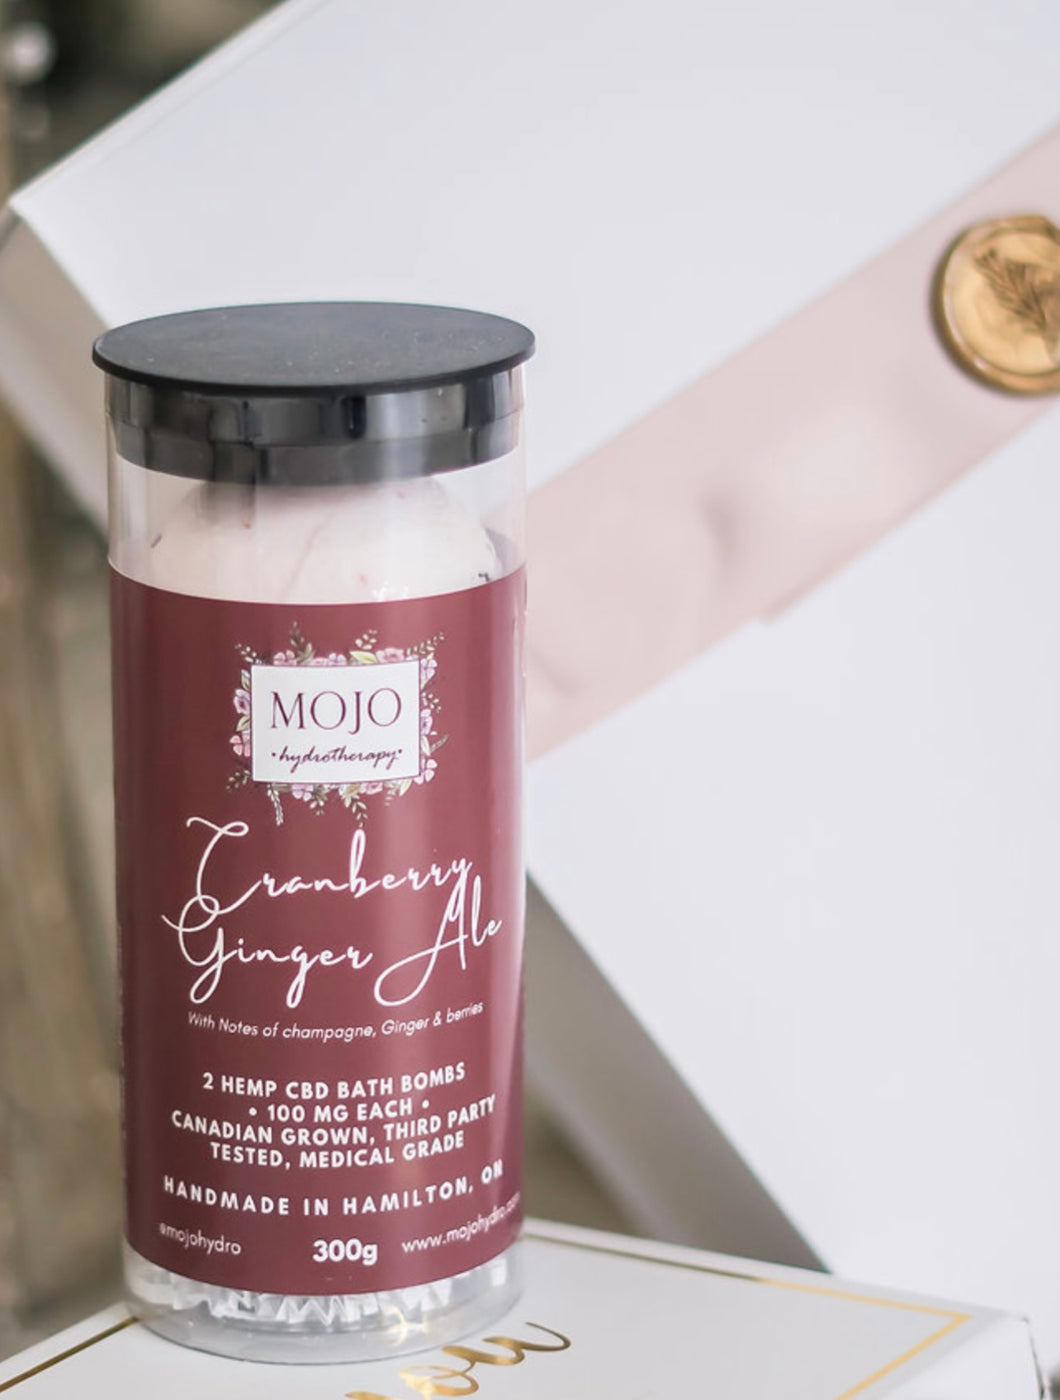 Cranberry & Ginger ale CBD Bath Bomb Duo ~ by Mojo Hydrotherapy